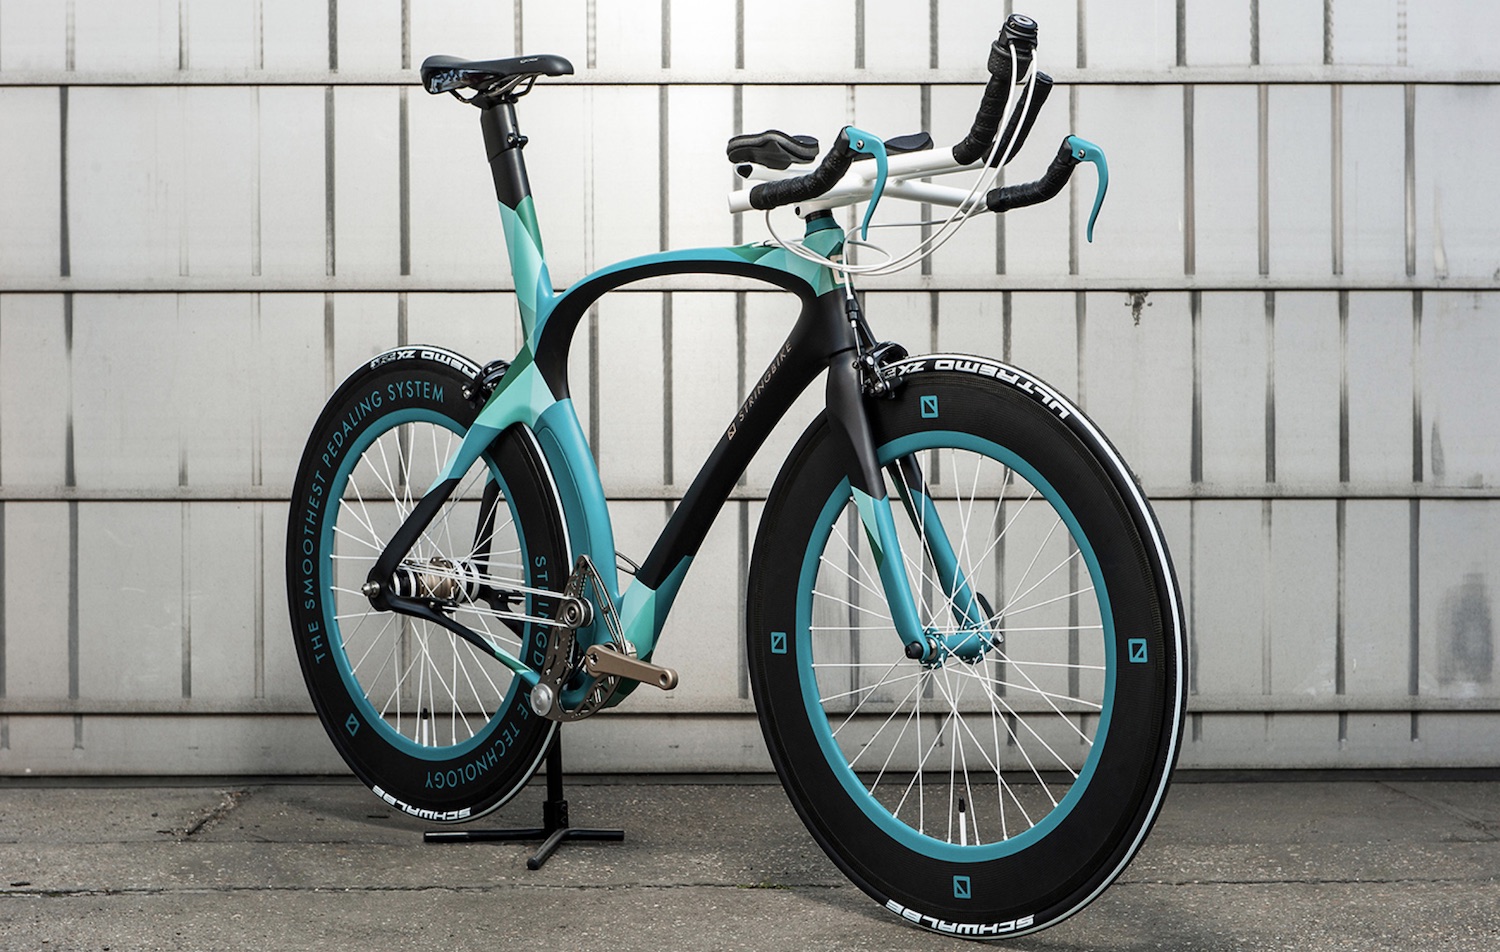 Are Chainless String Drive Bicycles a Genius or Terrible Idea?